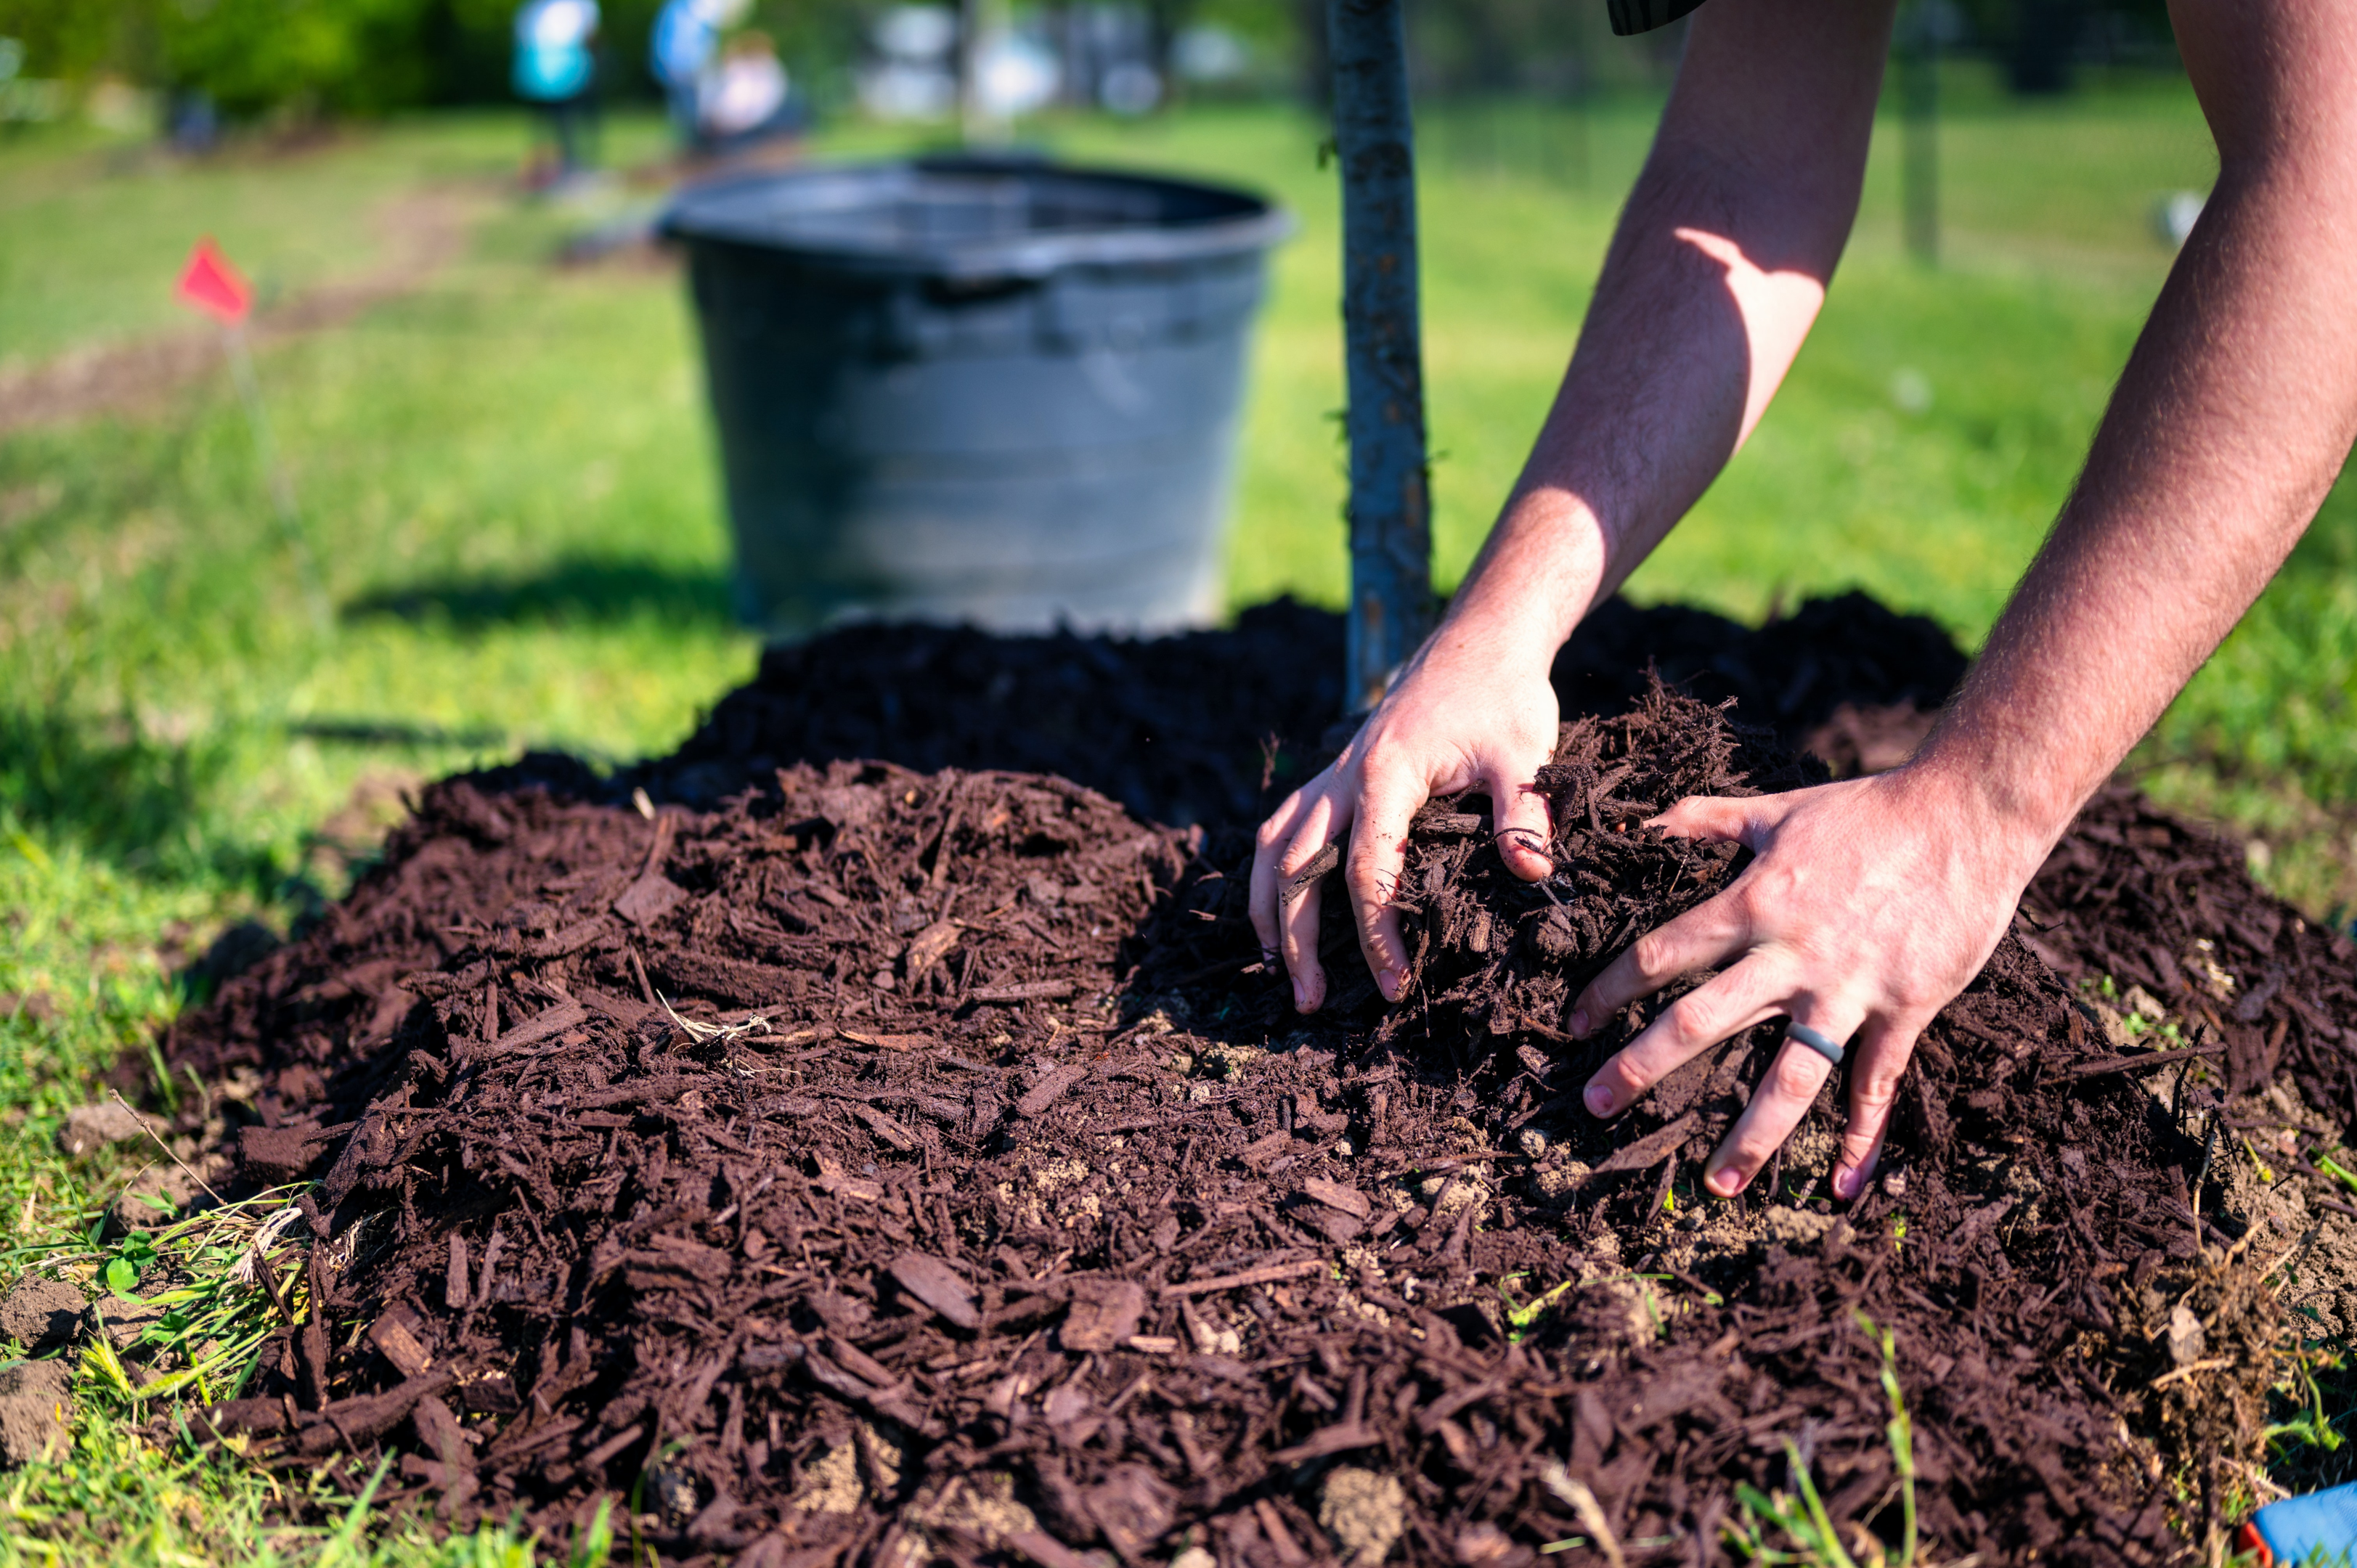 Soil can have a second career as mulch or compost